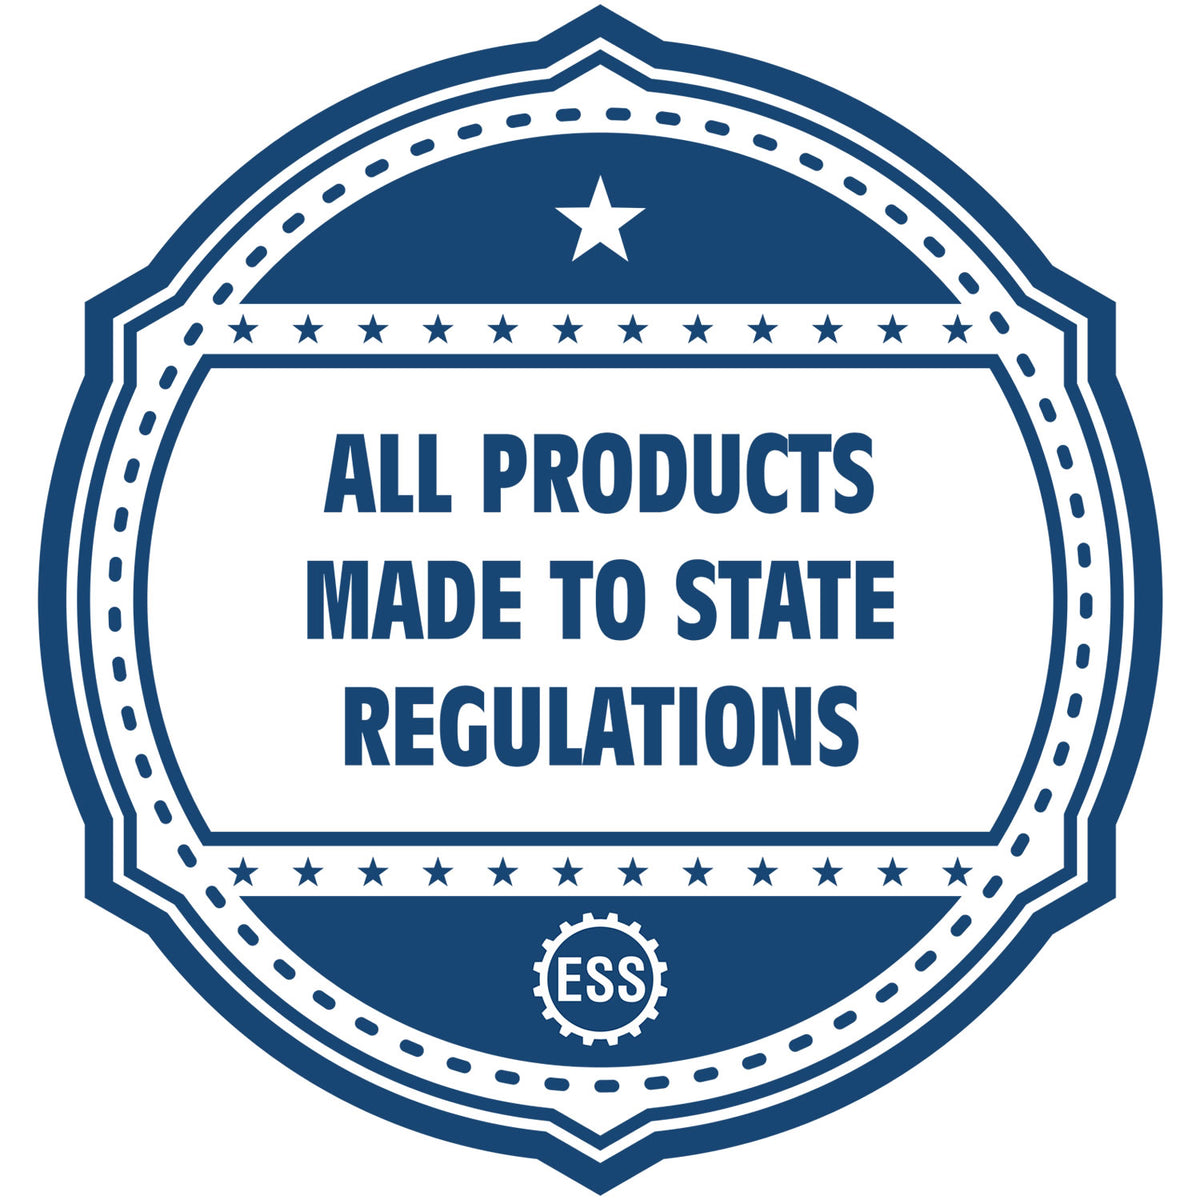 An icon or badge element for the State of Hawaii Soft Land Surveyor Embossing Seal showing that this product is made in compliance with state regulations.